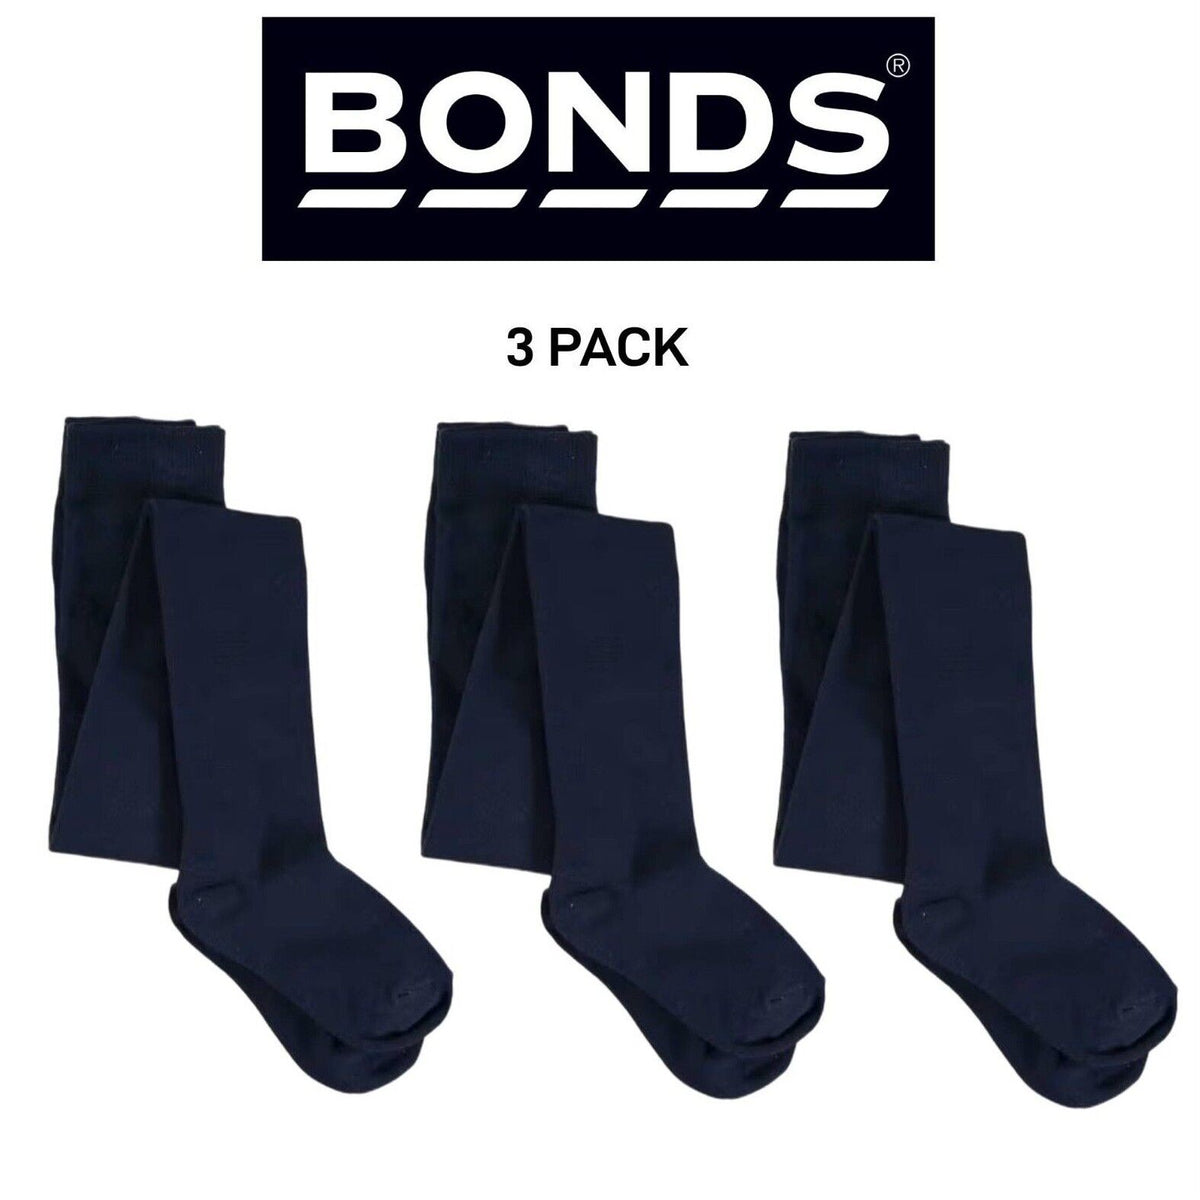 Bonds Kids School Tights Lycra Soft Waistband for Comfort Durable 3 Pack R6312N